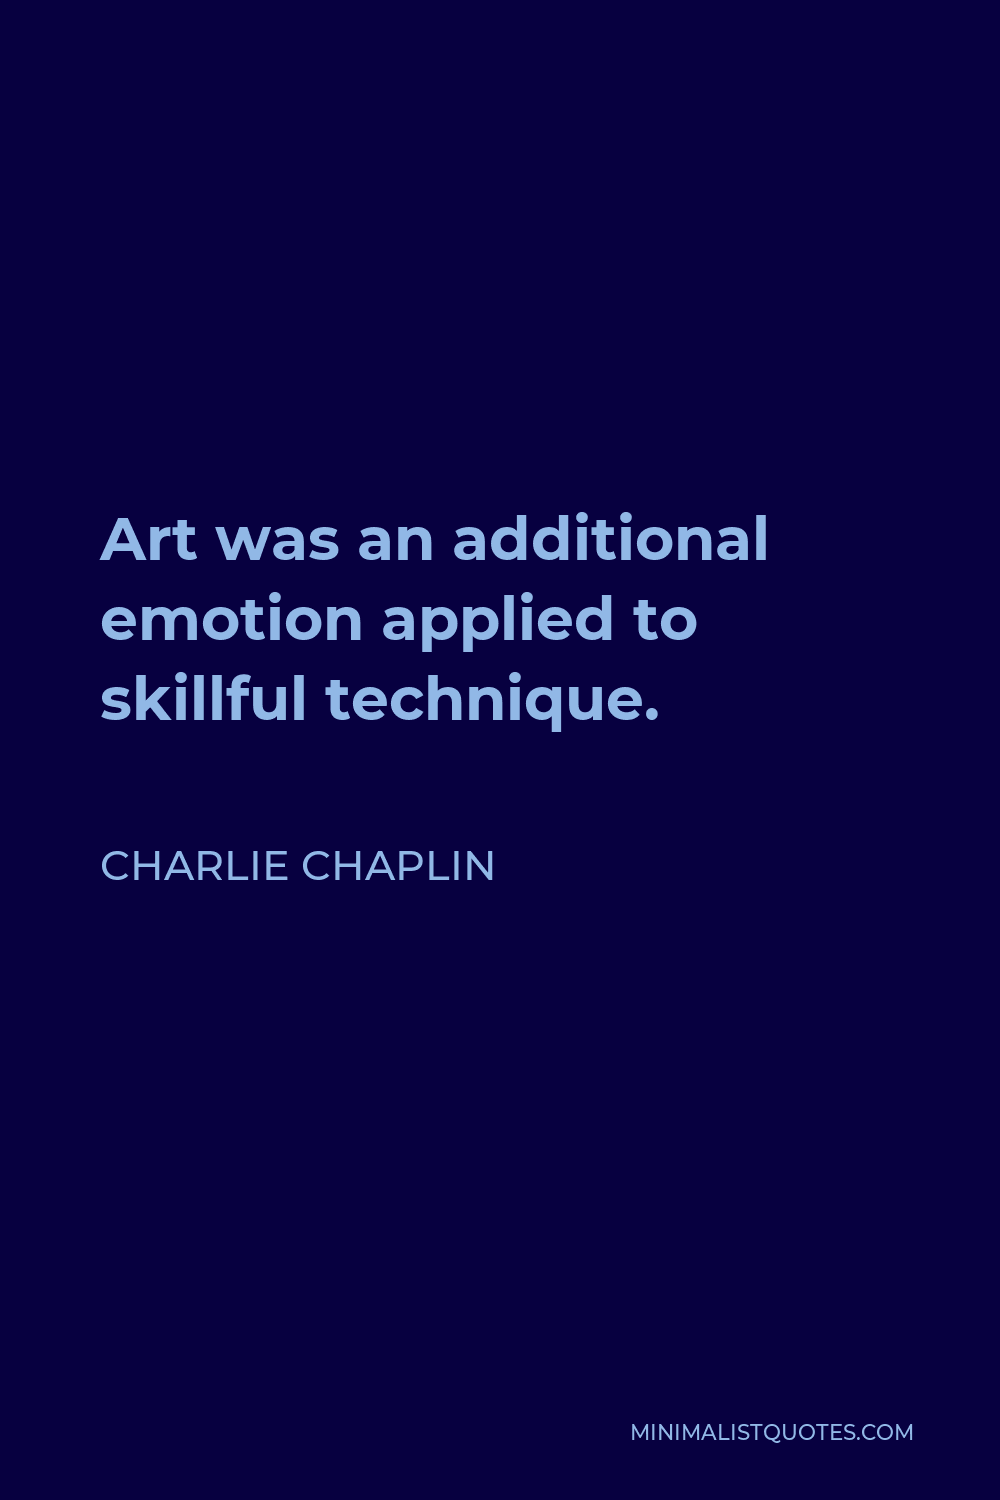 Charlie Chaplin Quote - Art was an additional emotion applied to skillful technique.